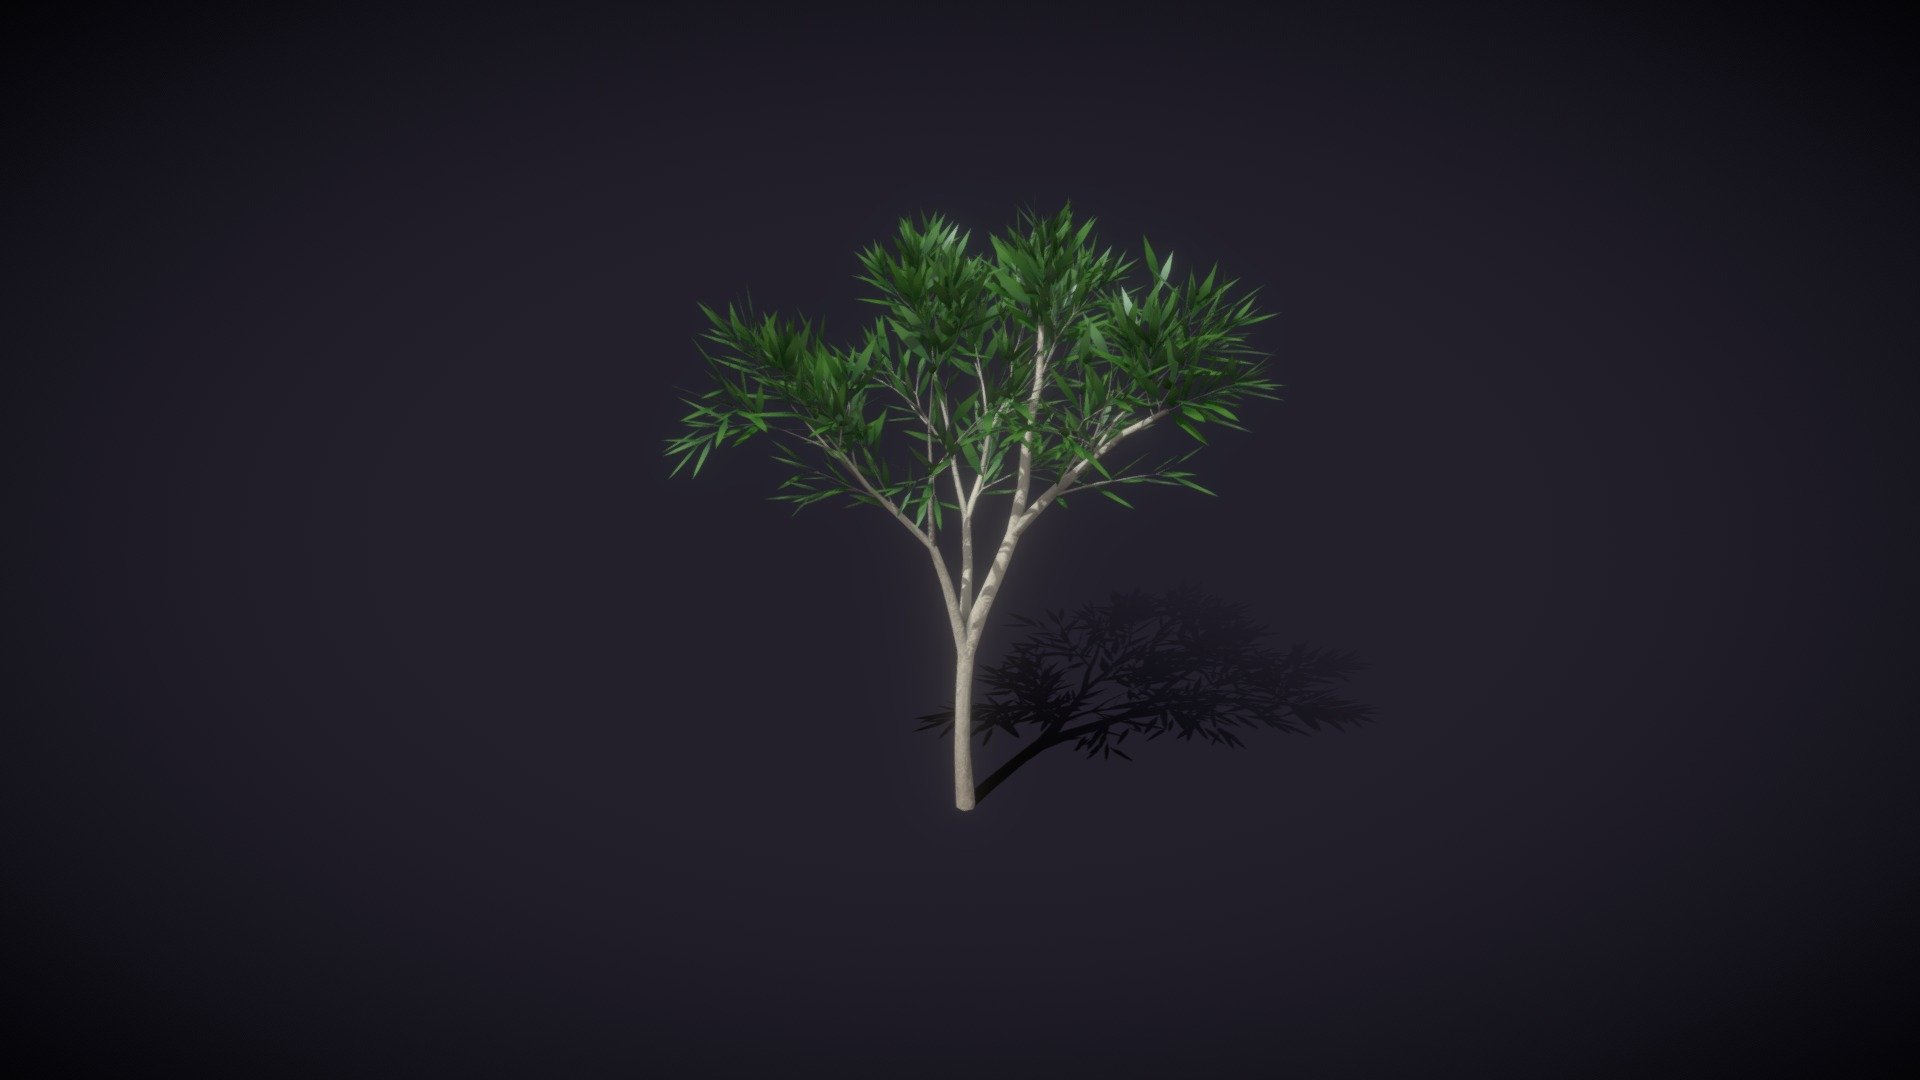 Cartoon Cartoon Eucalyptus Tree 3D Model is completely ready to be used in your games, animations, films, designs etc.



All textures and materials are included and mapped in every format. The model is completely ready for use visualization in any 3d software and engine.



Technical details:







File formats included in the package are: FBX, OBJ, ABC, DAE, GLB, PLY, STL, BLEND, gLTF (generated), USDZ (generated)

Native software file format: BLEND

Render engine: Eevee

Polygons: 6,586

Vertices: 12,150

Textures: Color, Metallic, Roughness, Normal, AO.

All textures are 2k resolution.
 - Cartoon Cartoon Eucalyptus Tree 3D Model - Buy Royalty Free 3D model by 3DDisco 3d model